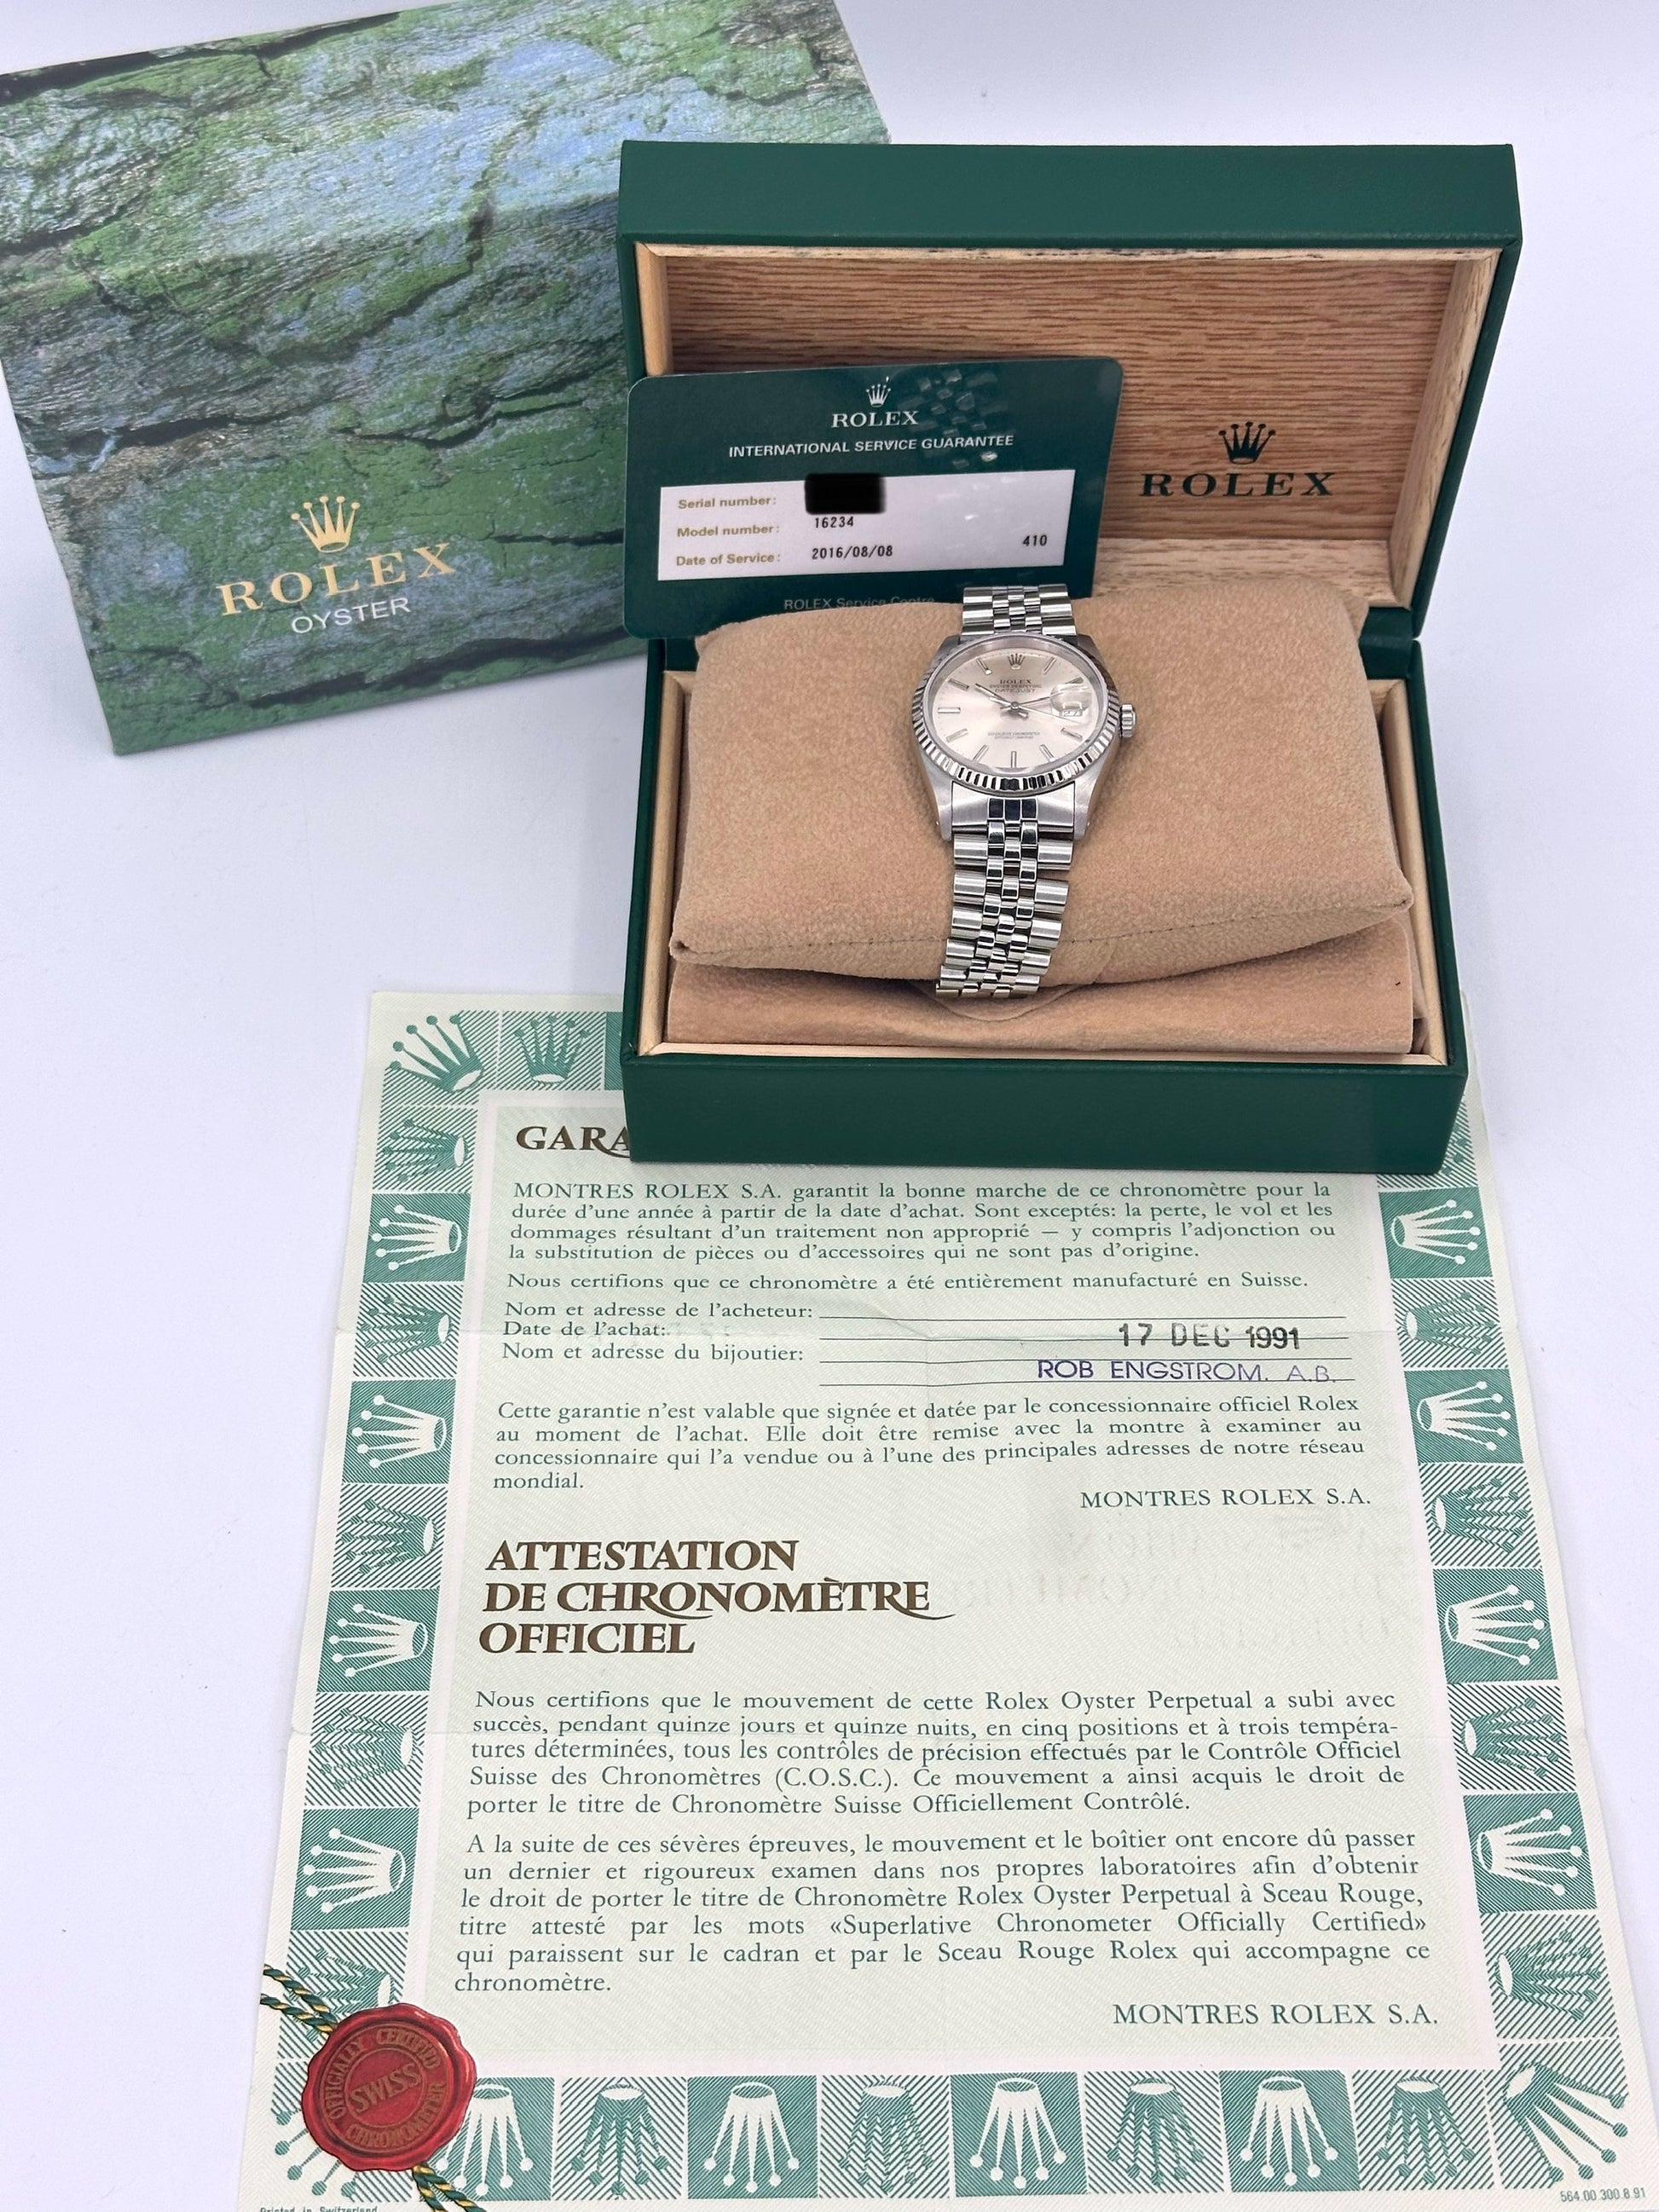 1991 Rolex Datejust 36mm 16234 Stainless Steel Jubilee Silver Dial - MyWatchLLC